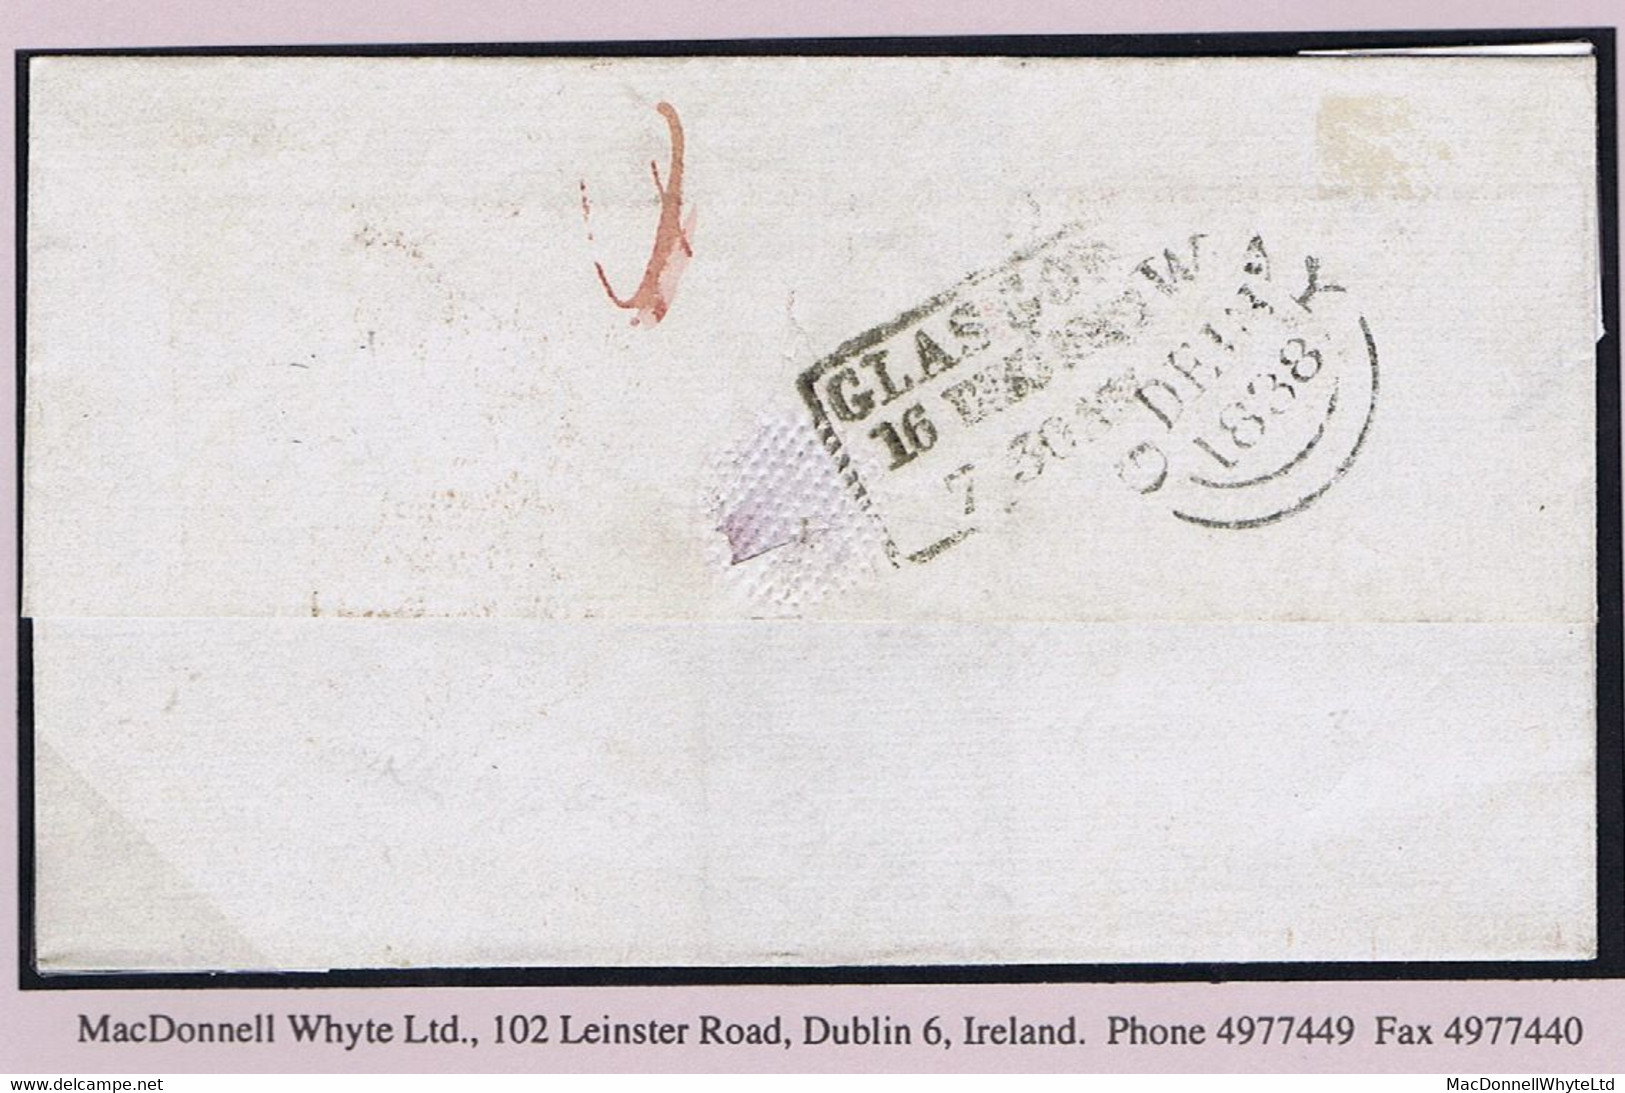 Ireland Galway 1838 Boxed PAID AT/GALWAY Clear In Black On Cover To Glasgow Prepaid "2/10" Double Rate - Prephilately